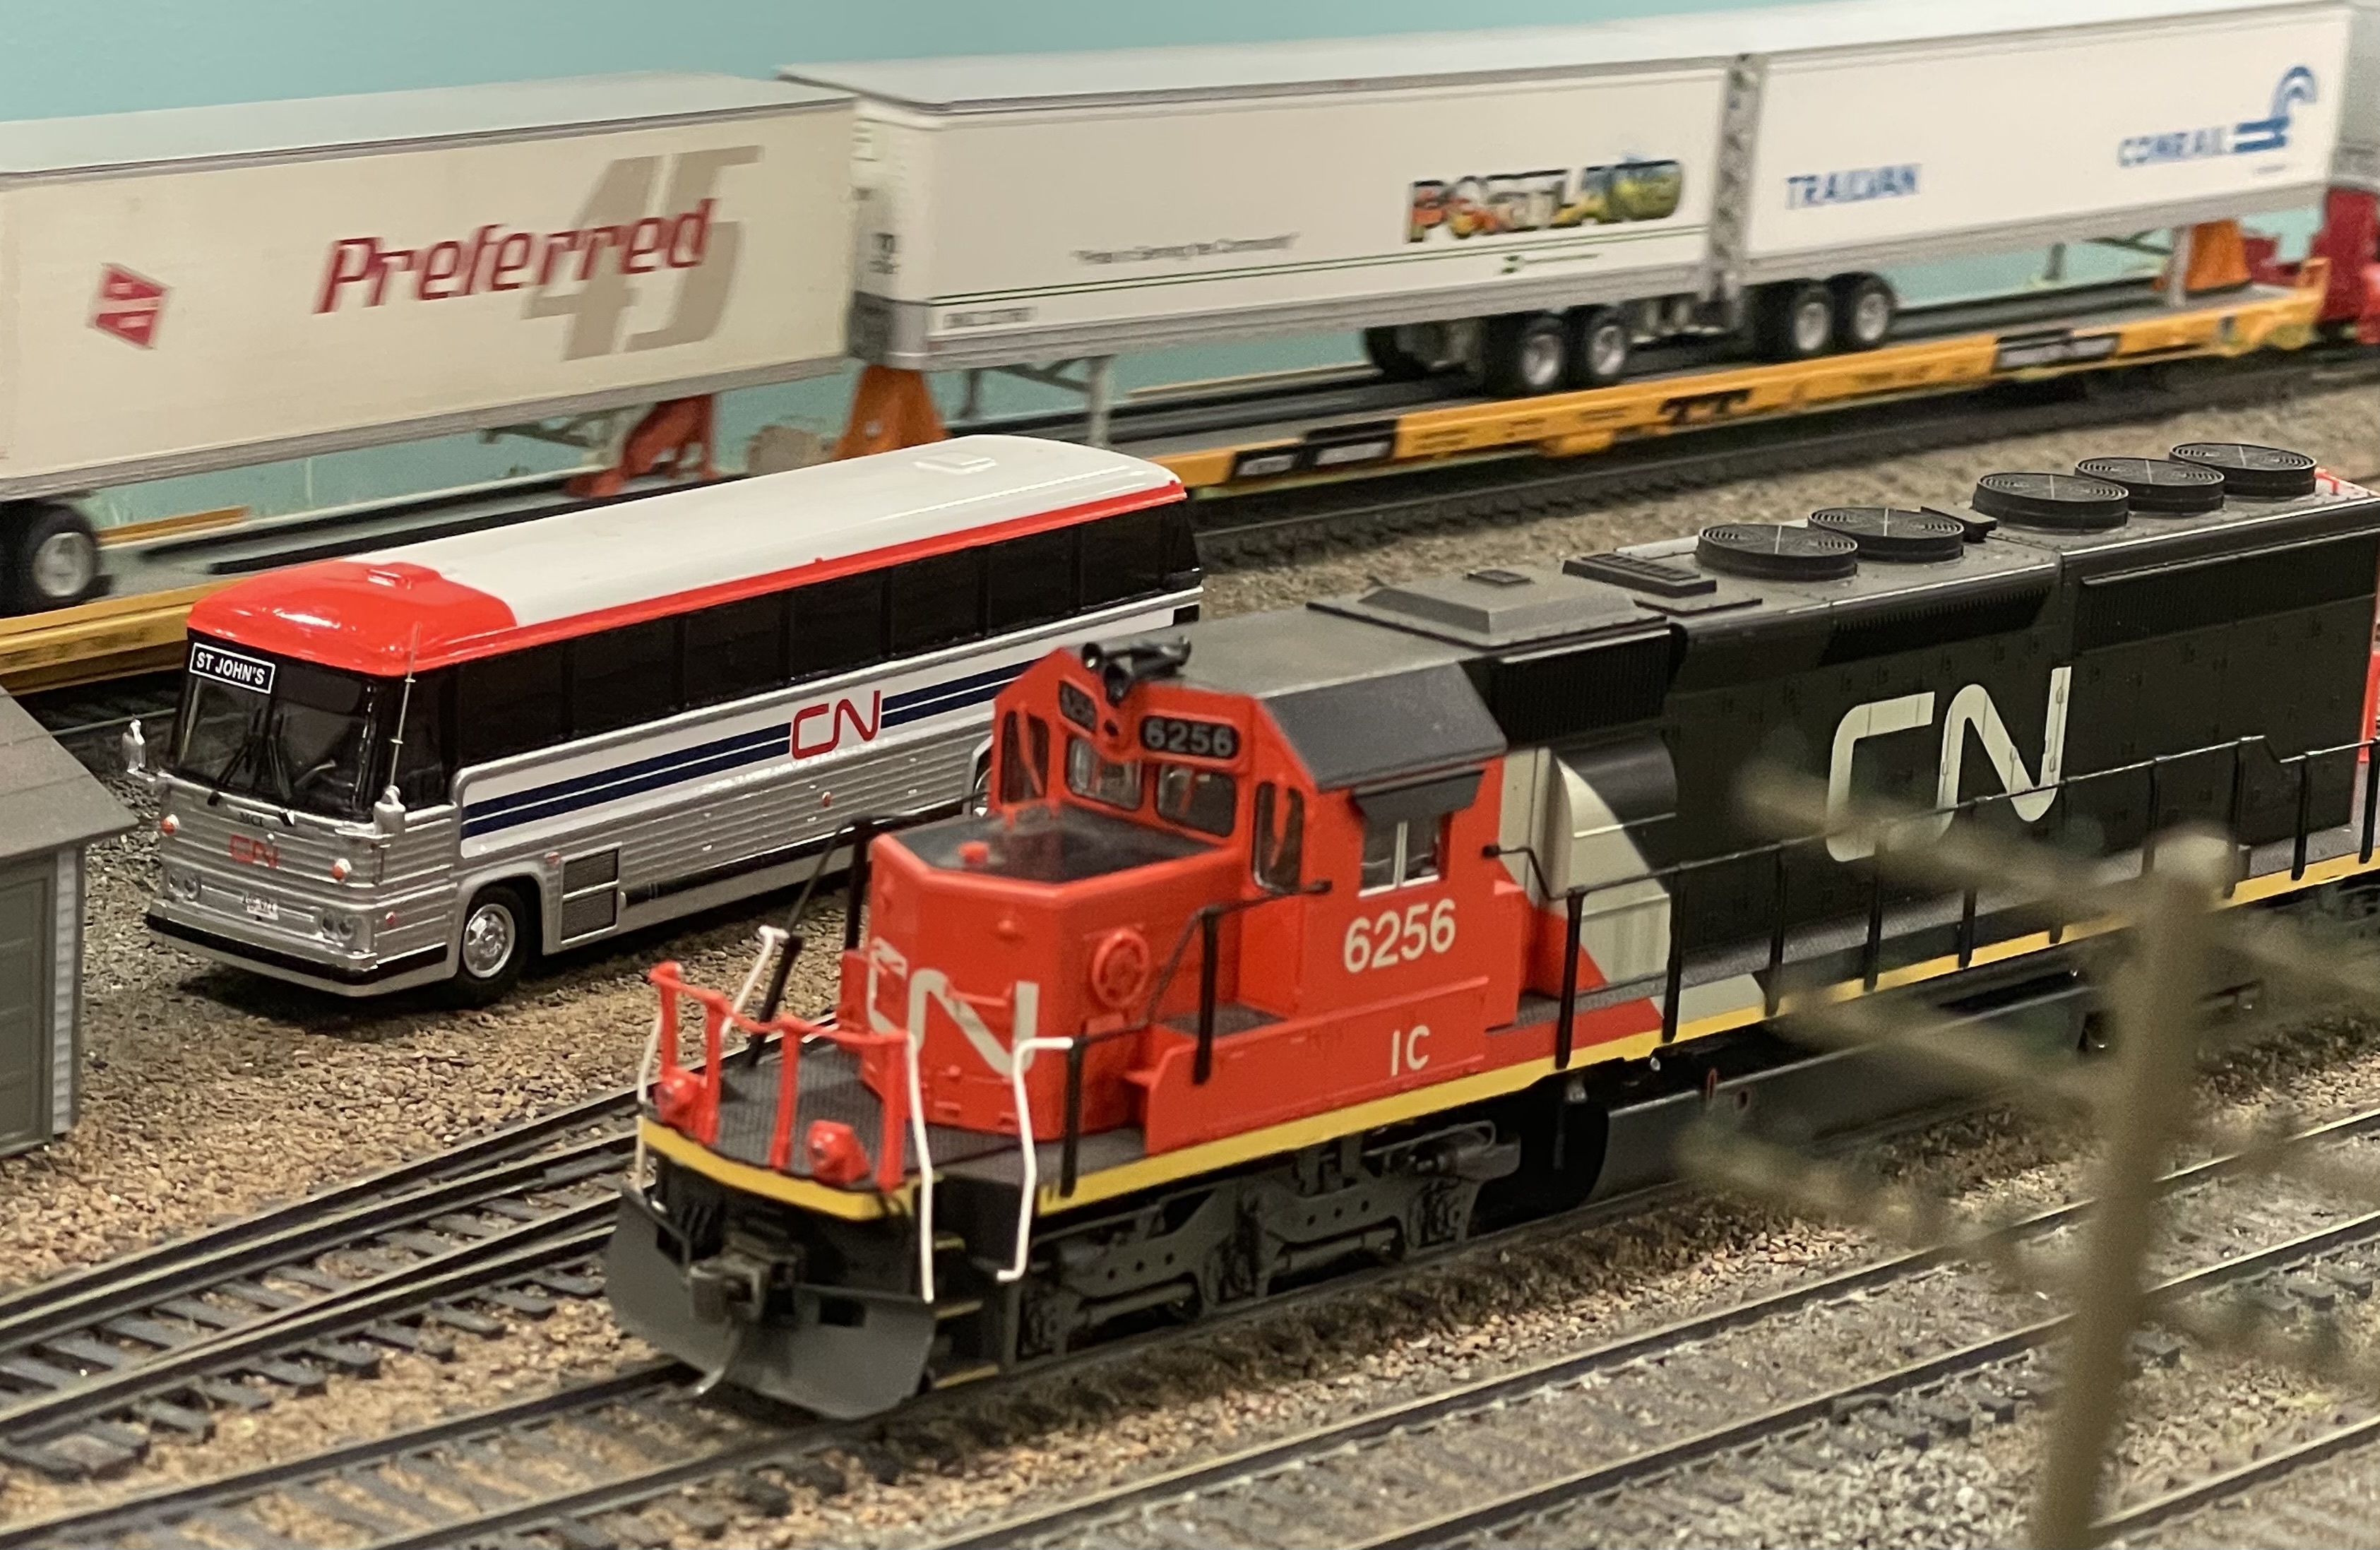  Introducing Our Latest Replica Models and Liveries at Trainfest 2022- Image 3